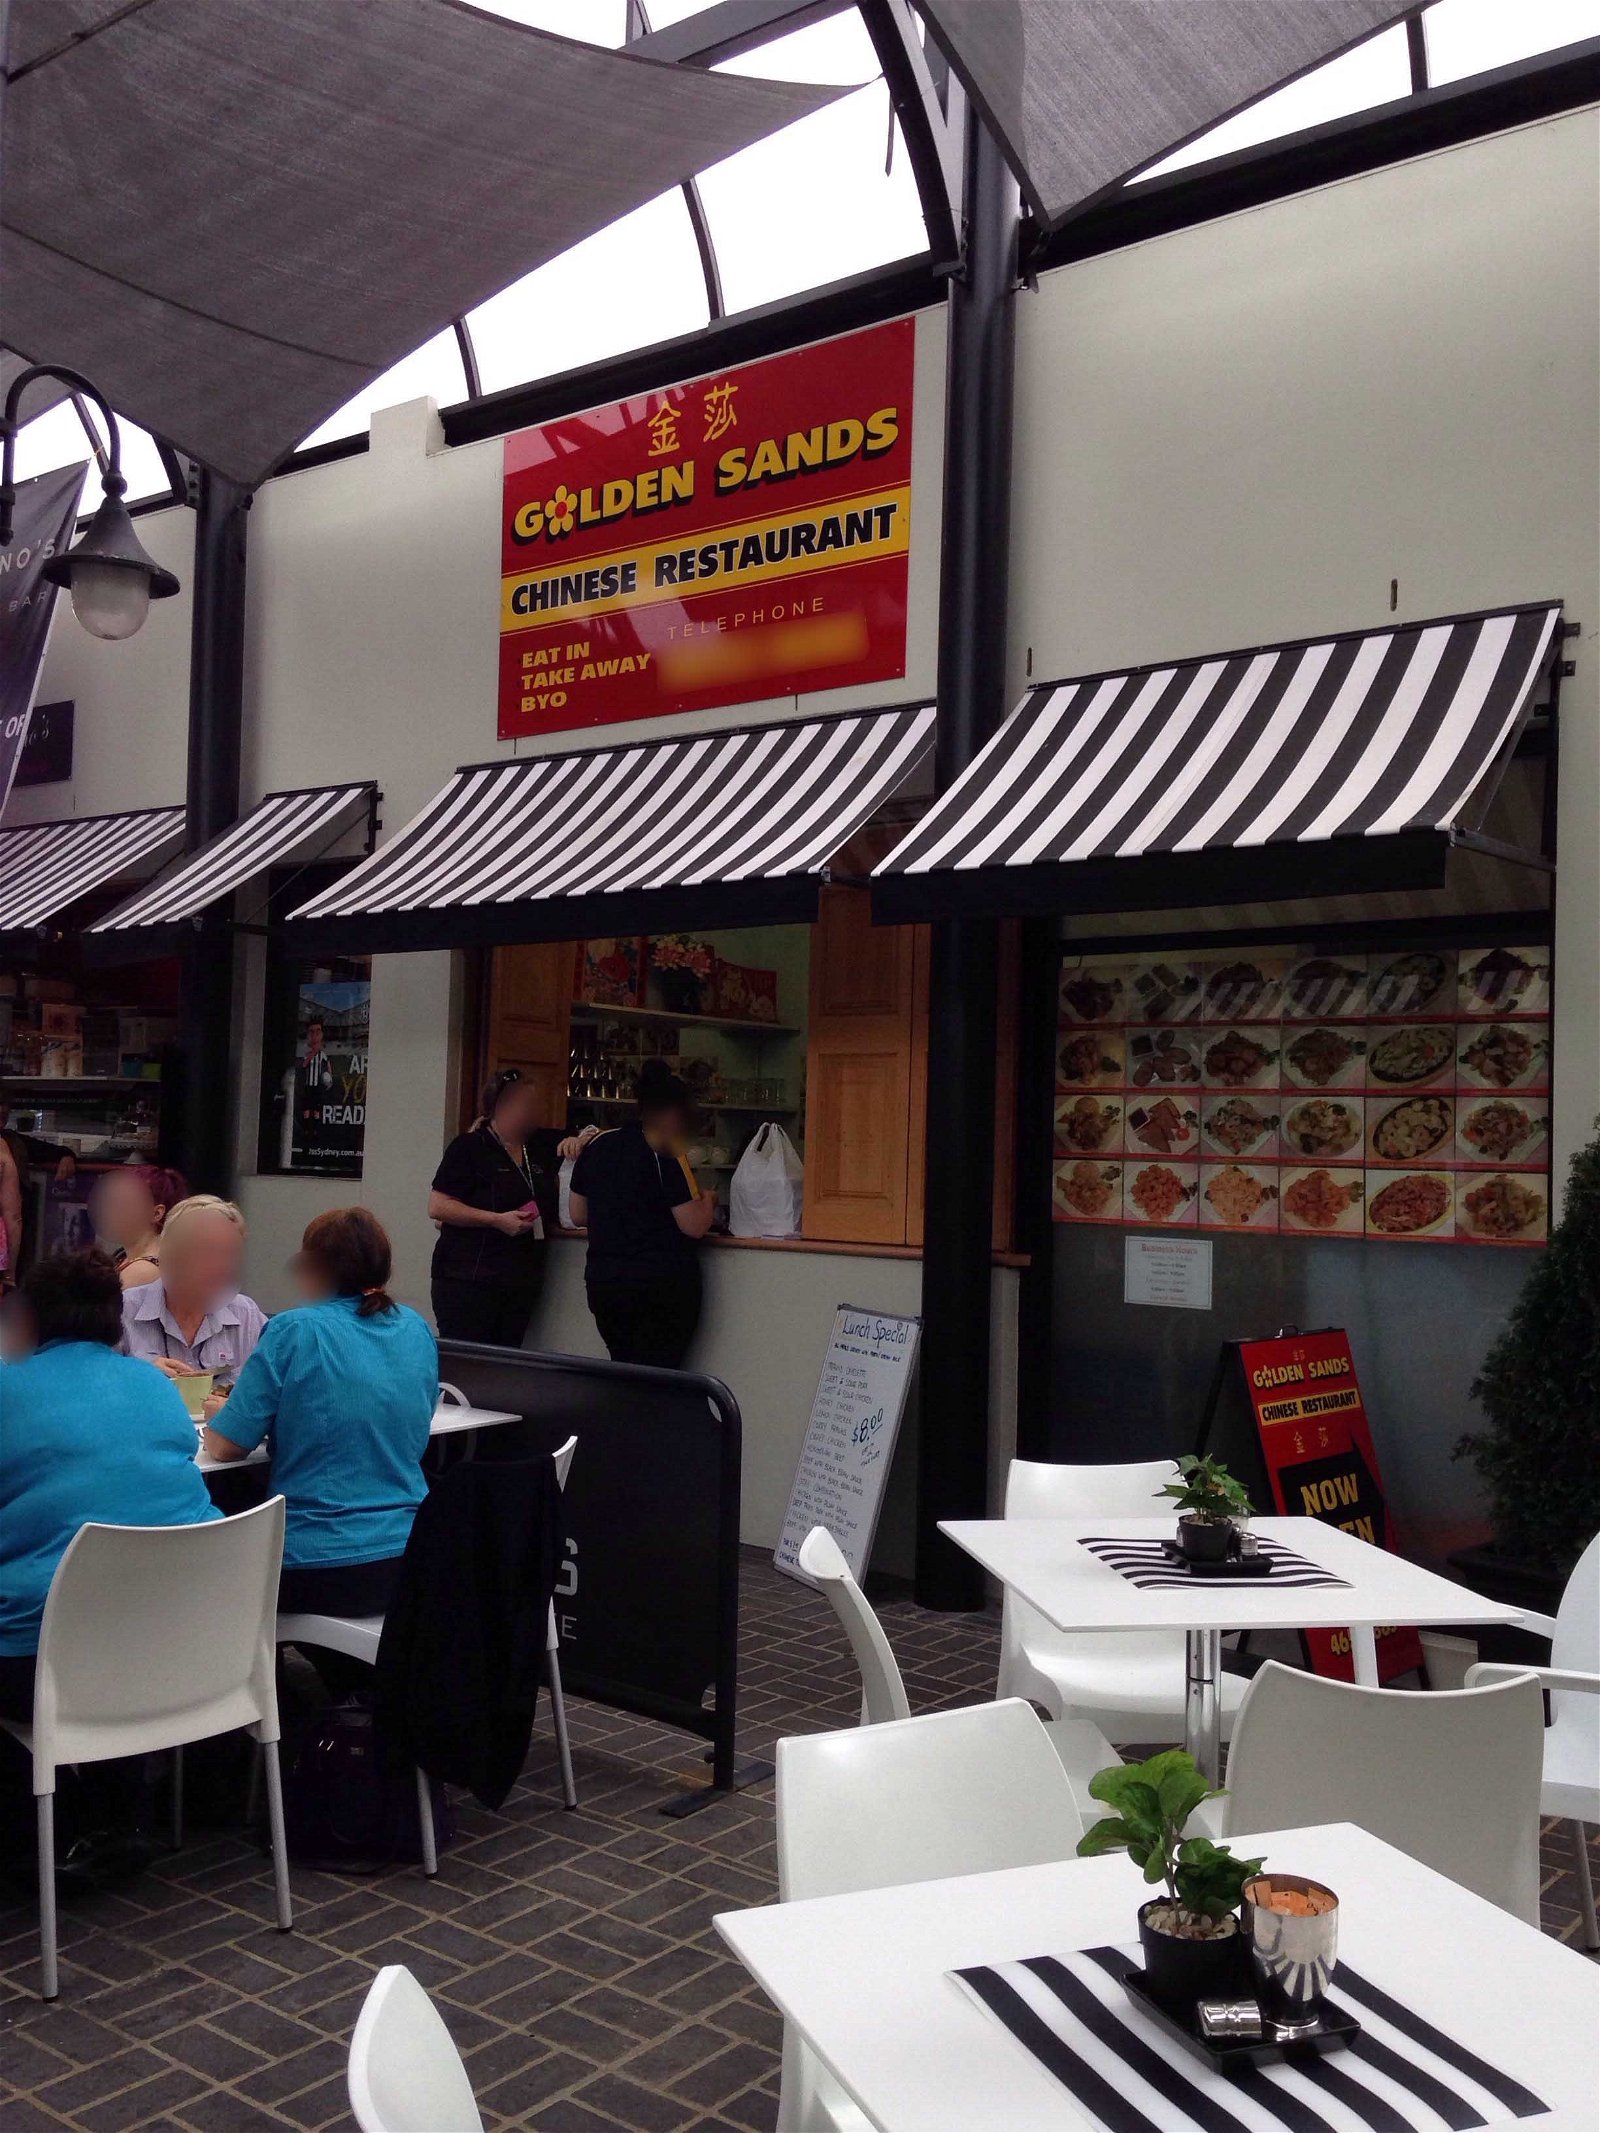 Golden Sands Chinese Restaurant and Take Away - Pubs Sydney